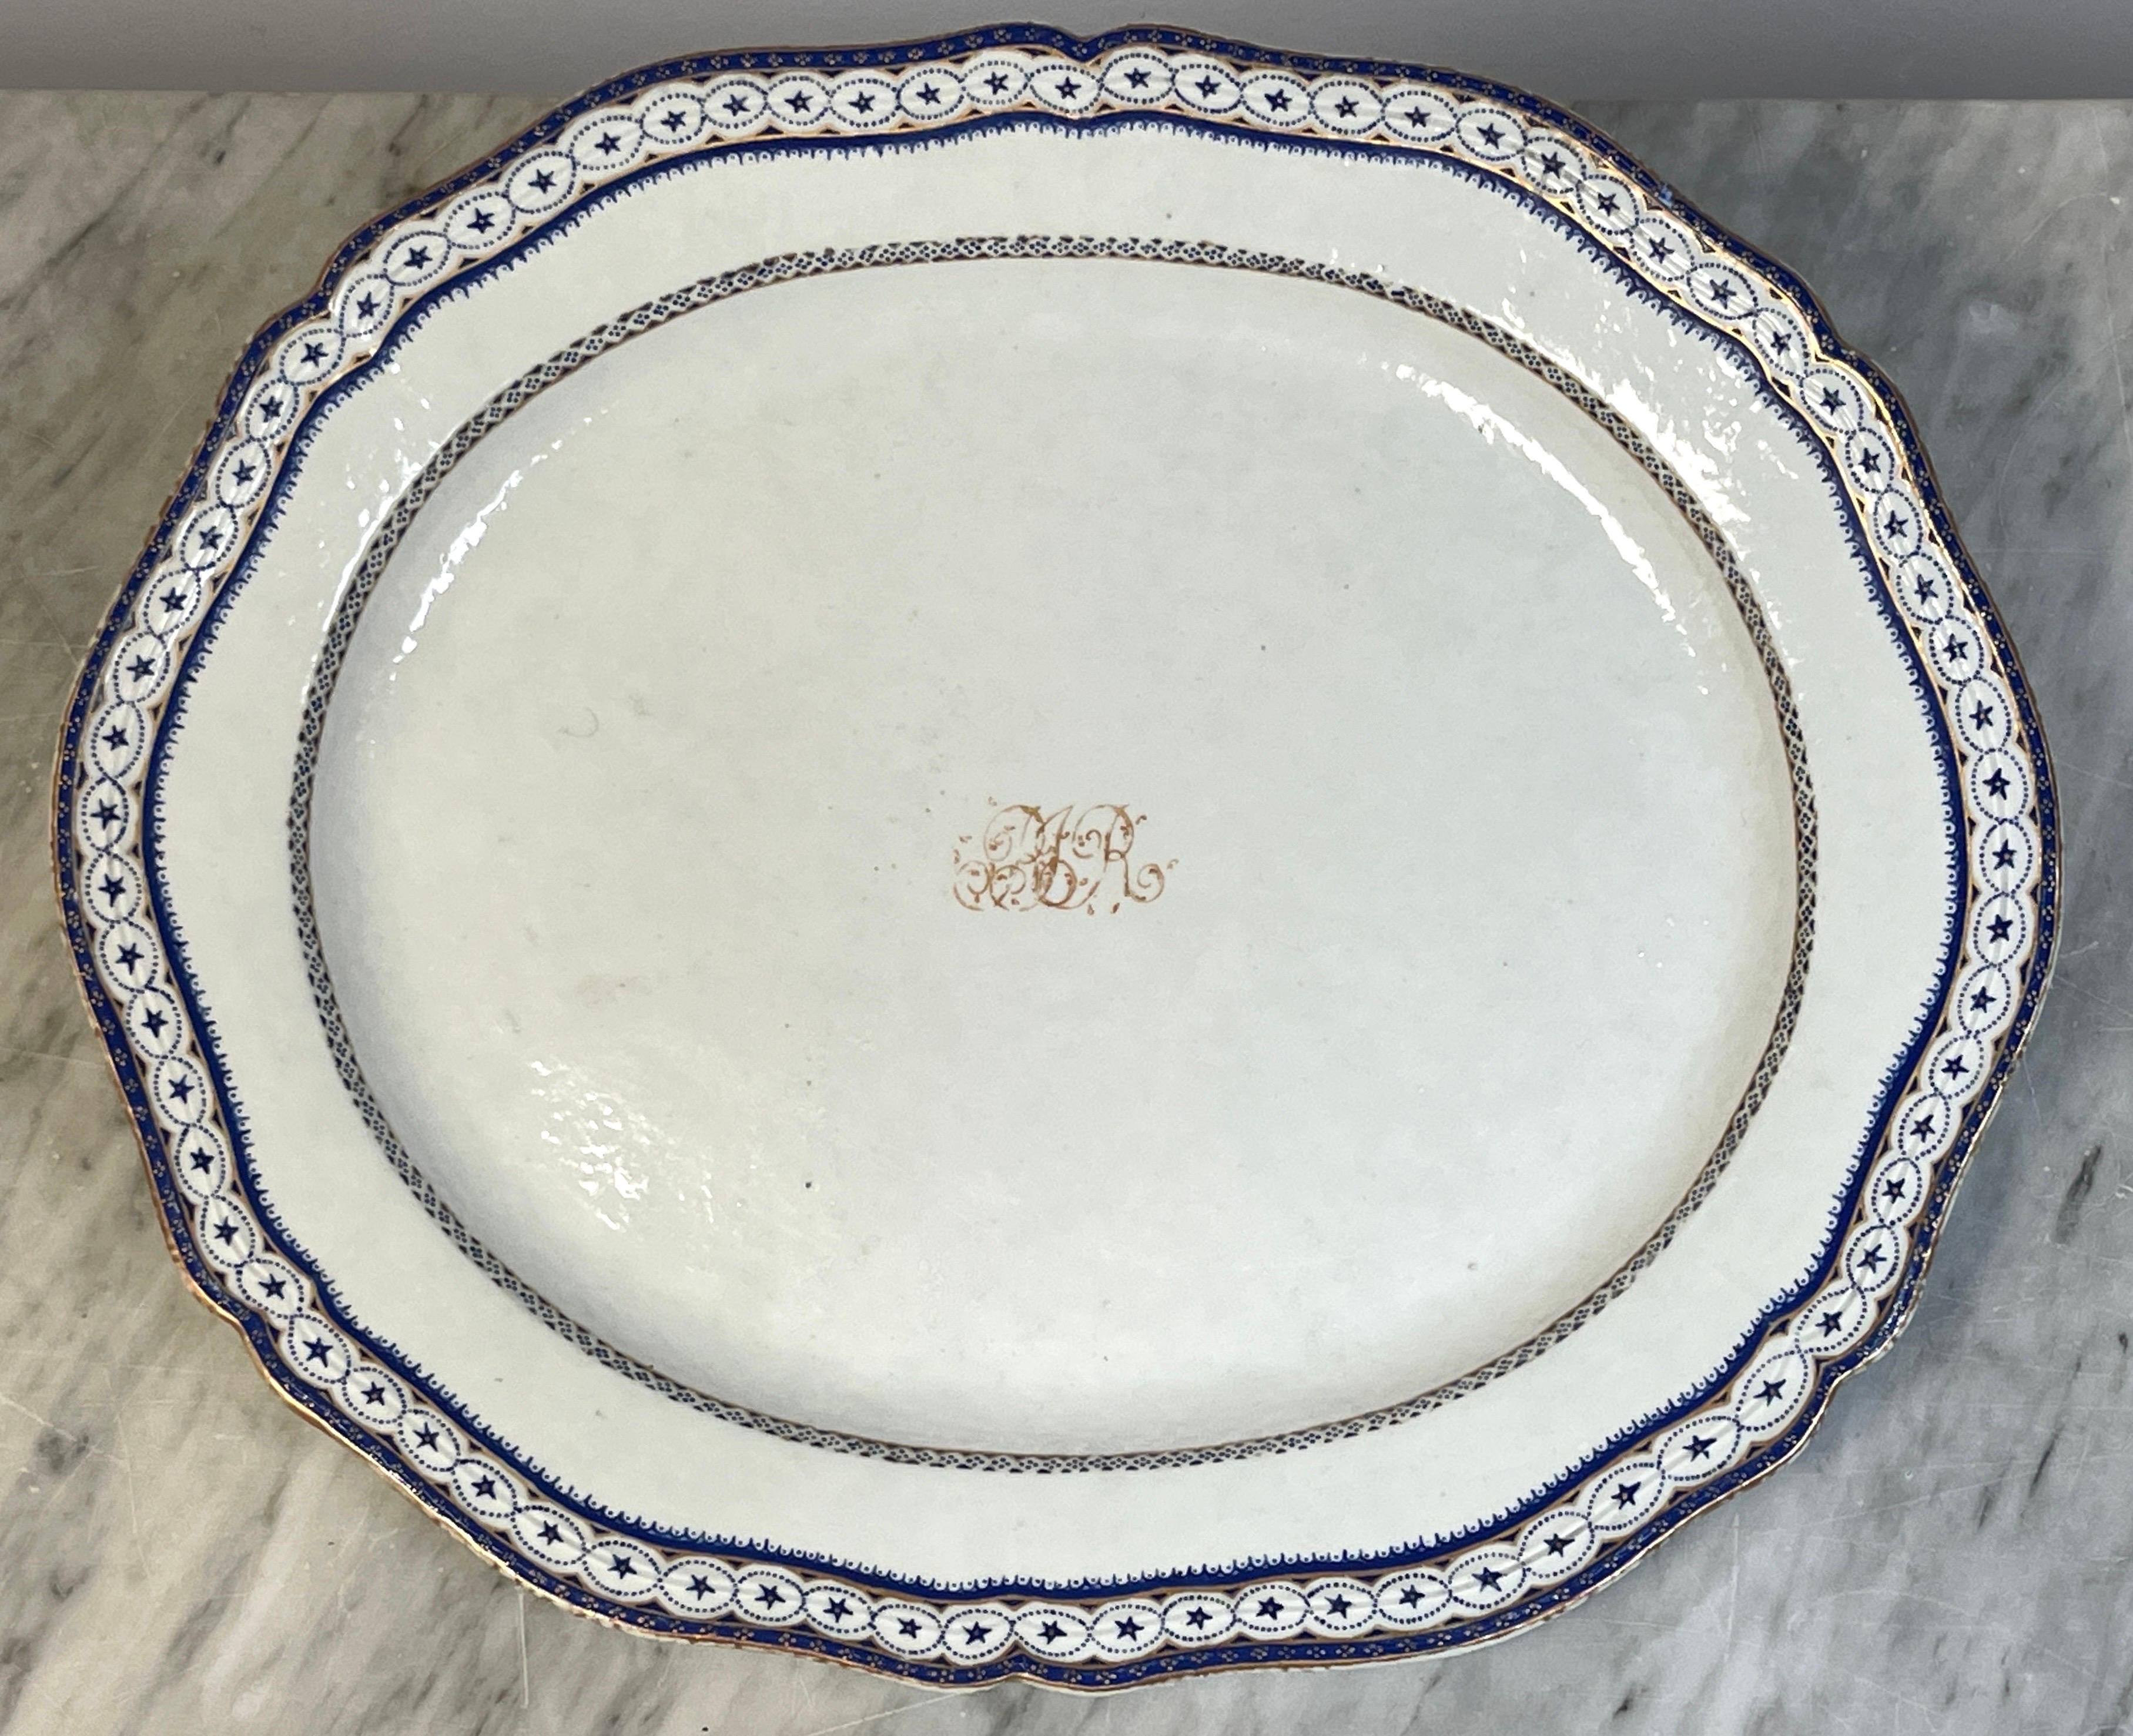 Porcelain Chinese Export American Market, Blue & White 'Star' Boarder Armorial Platter For Sale